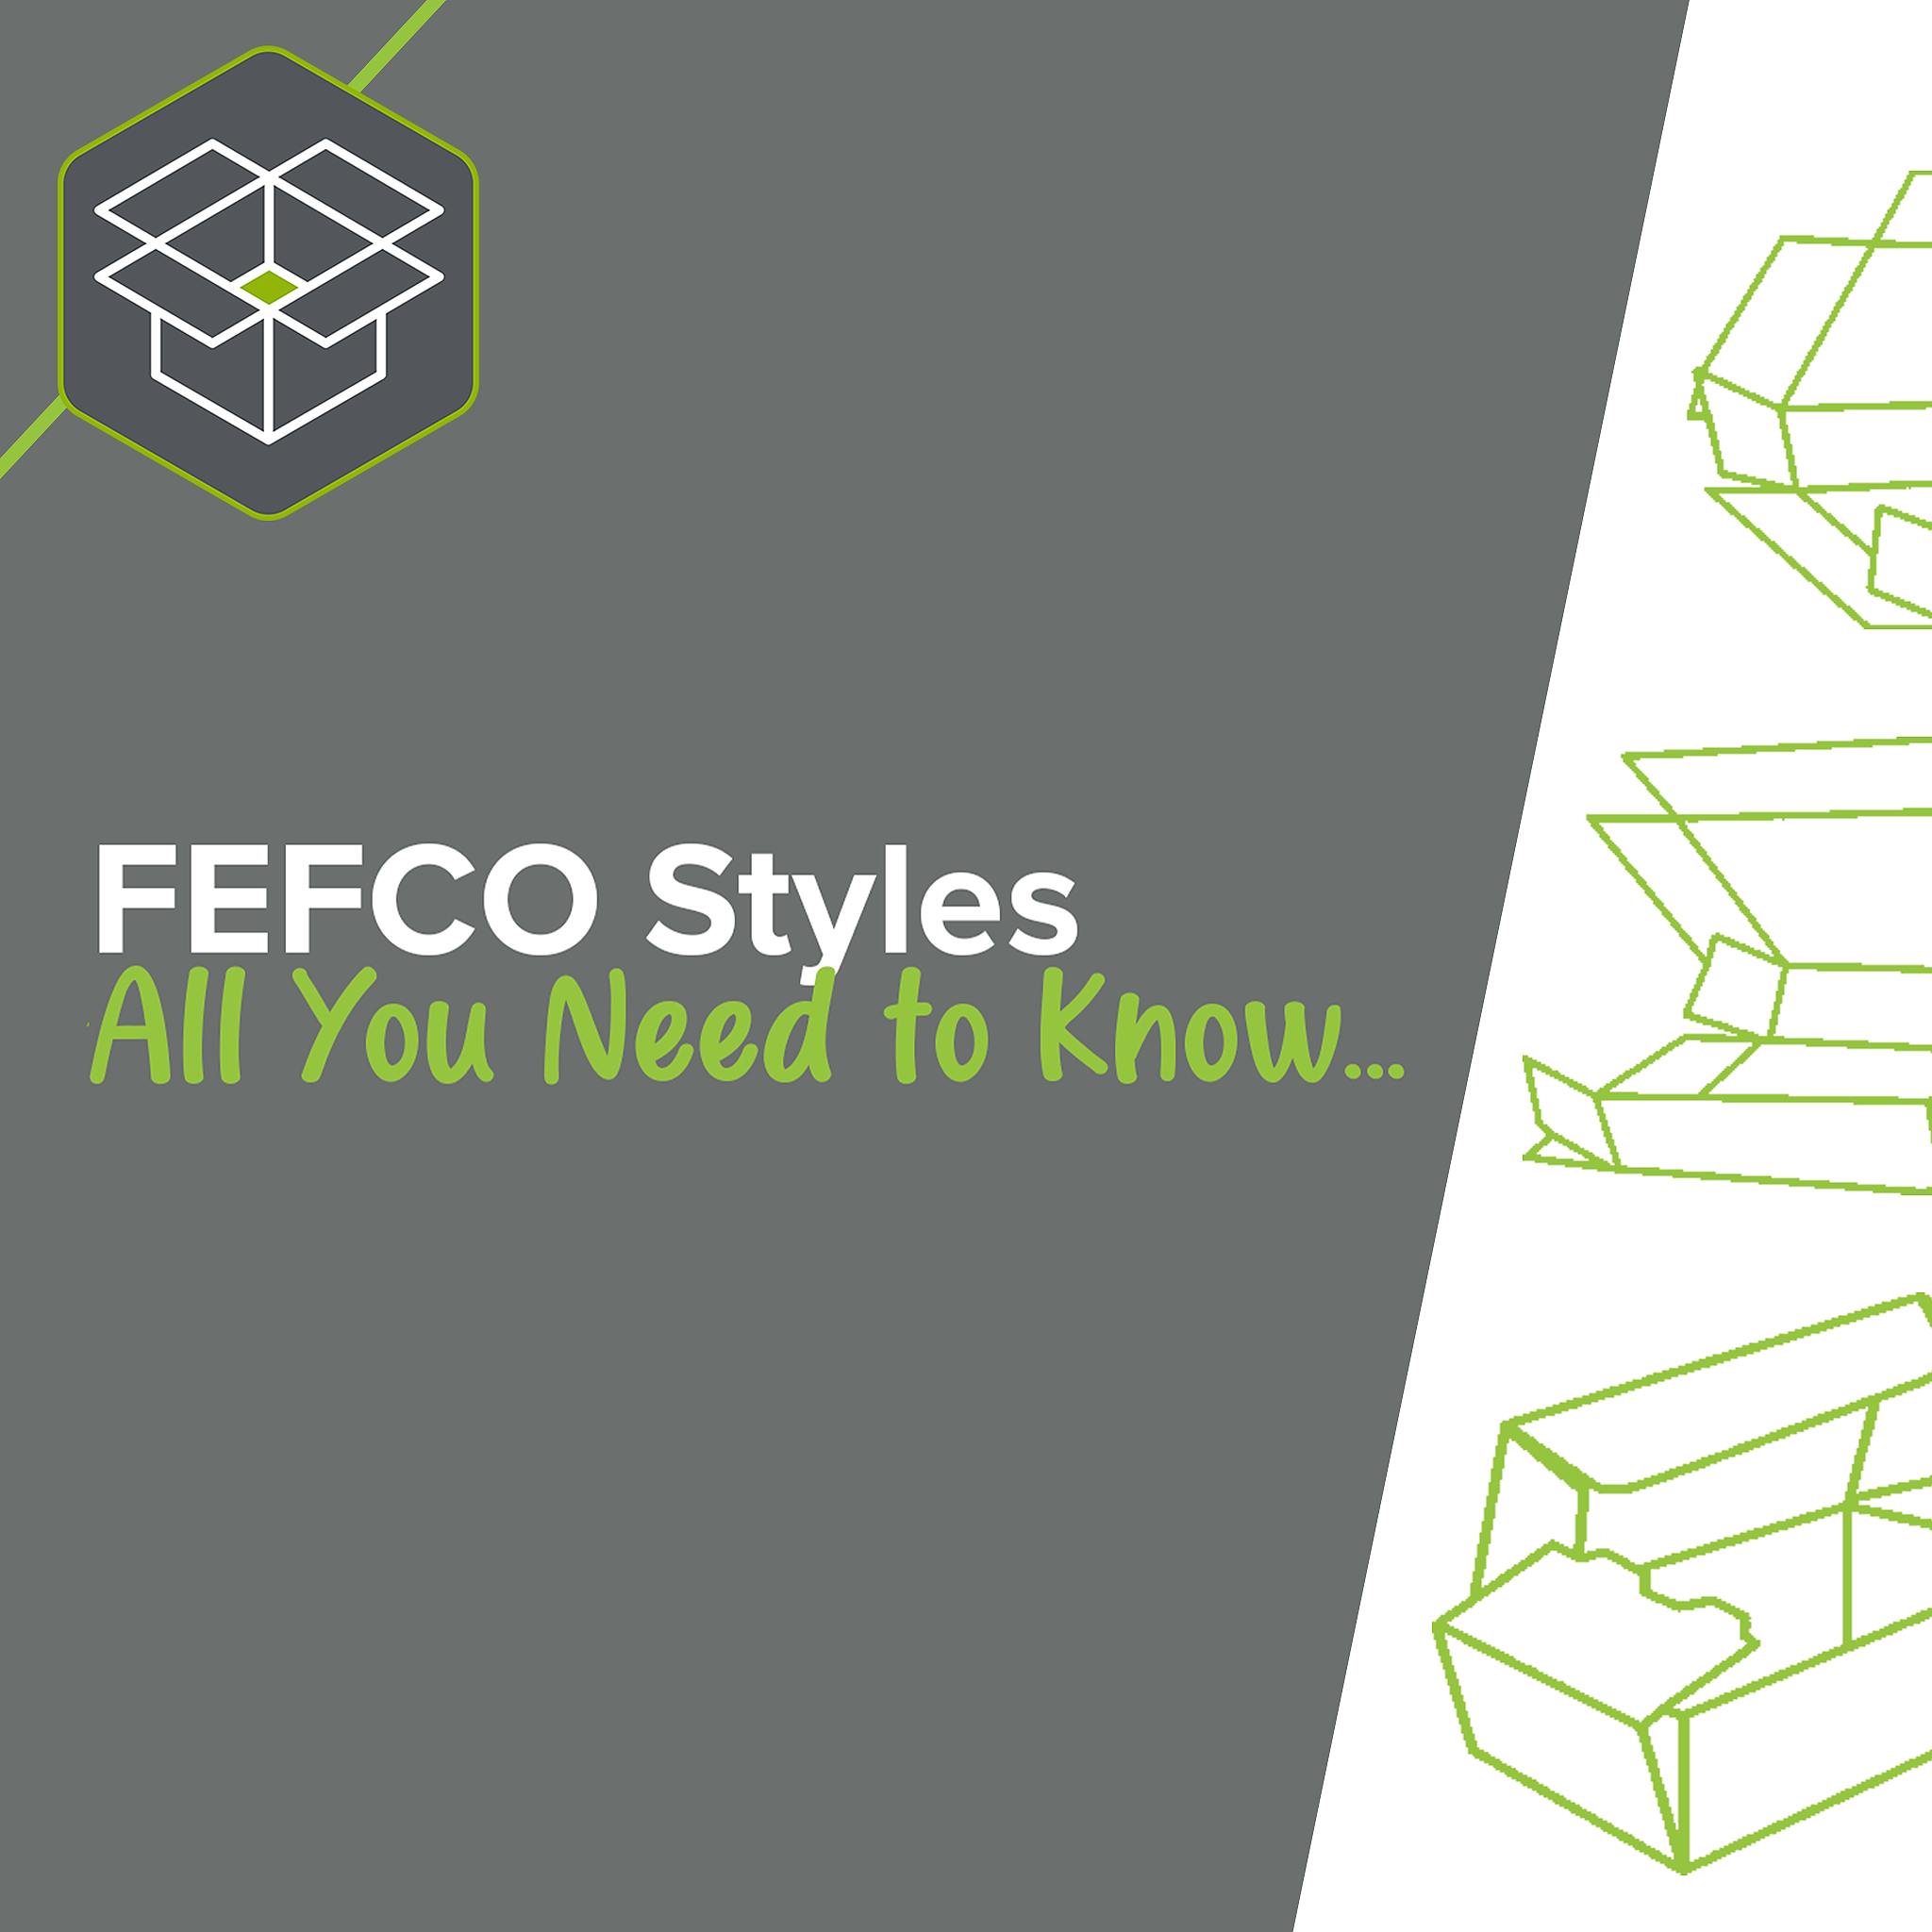 Video shorts – Find out more about FEFCO codes